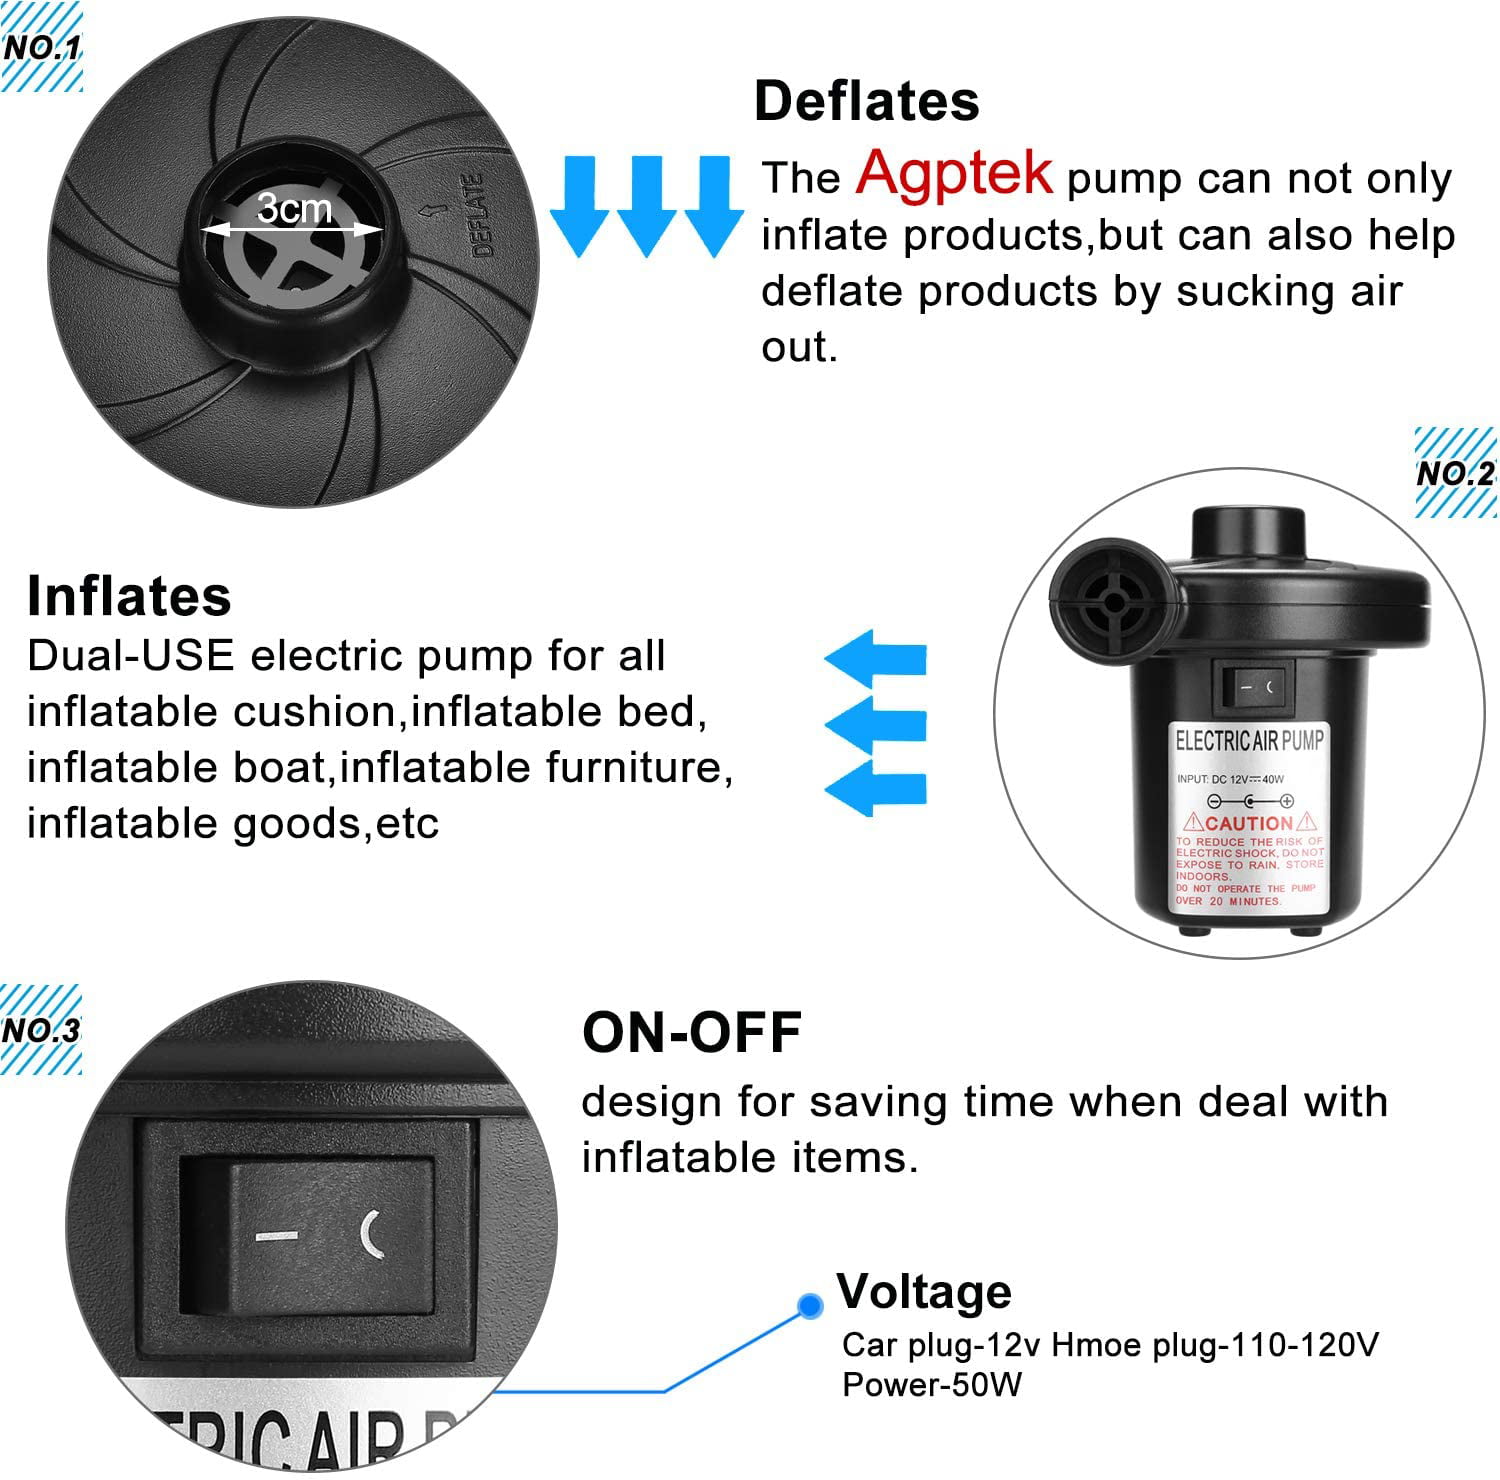 110V AC/12V DC Perfect Inflator/Deflator Pumps for Outdoor Camping Electric Air Pump Boats AGPtEK Portable Quick-Fill Air Pump with 3 Nozzles Inflatable Cushions Air Mattress Beds Swimming Ring 